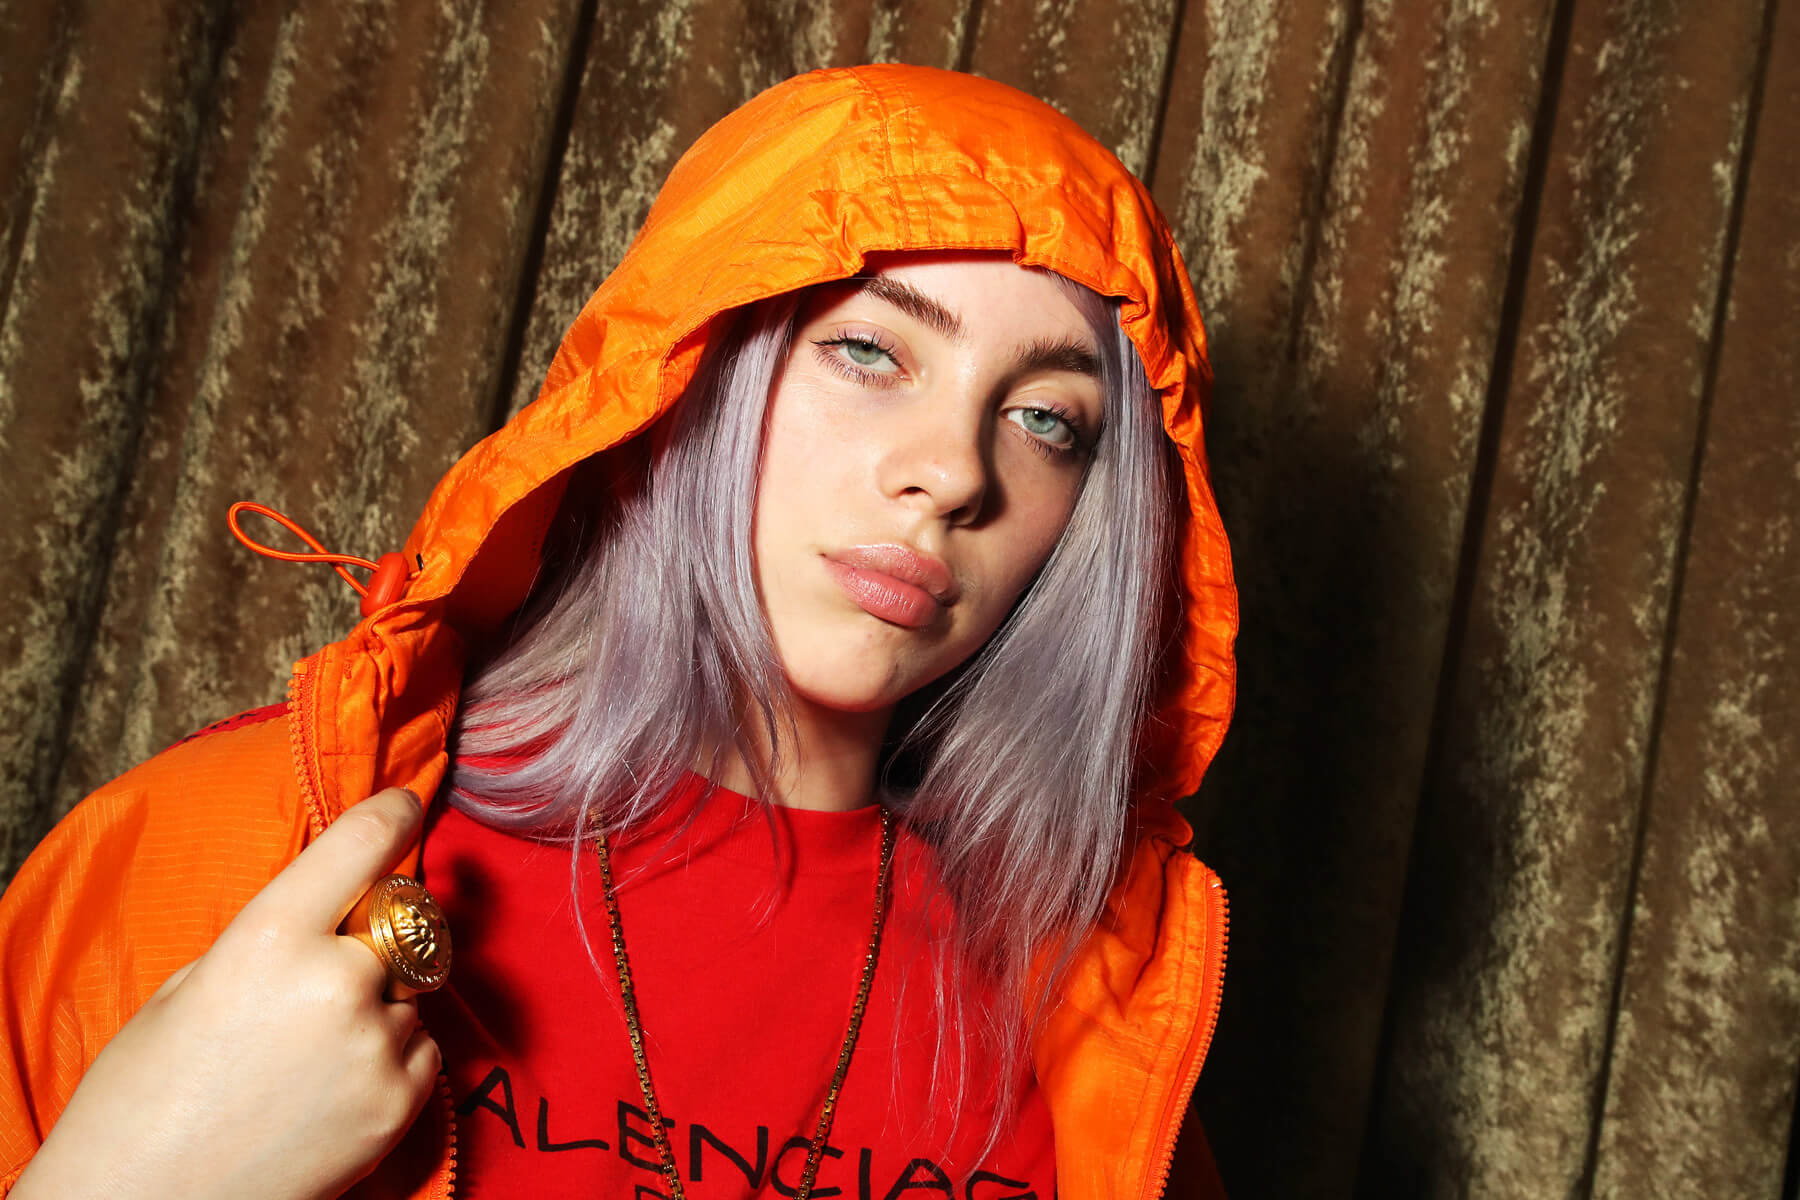 70+ Hot Pictures Of Billie Eilish Which Will Make Your Day - Page 5 of